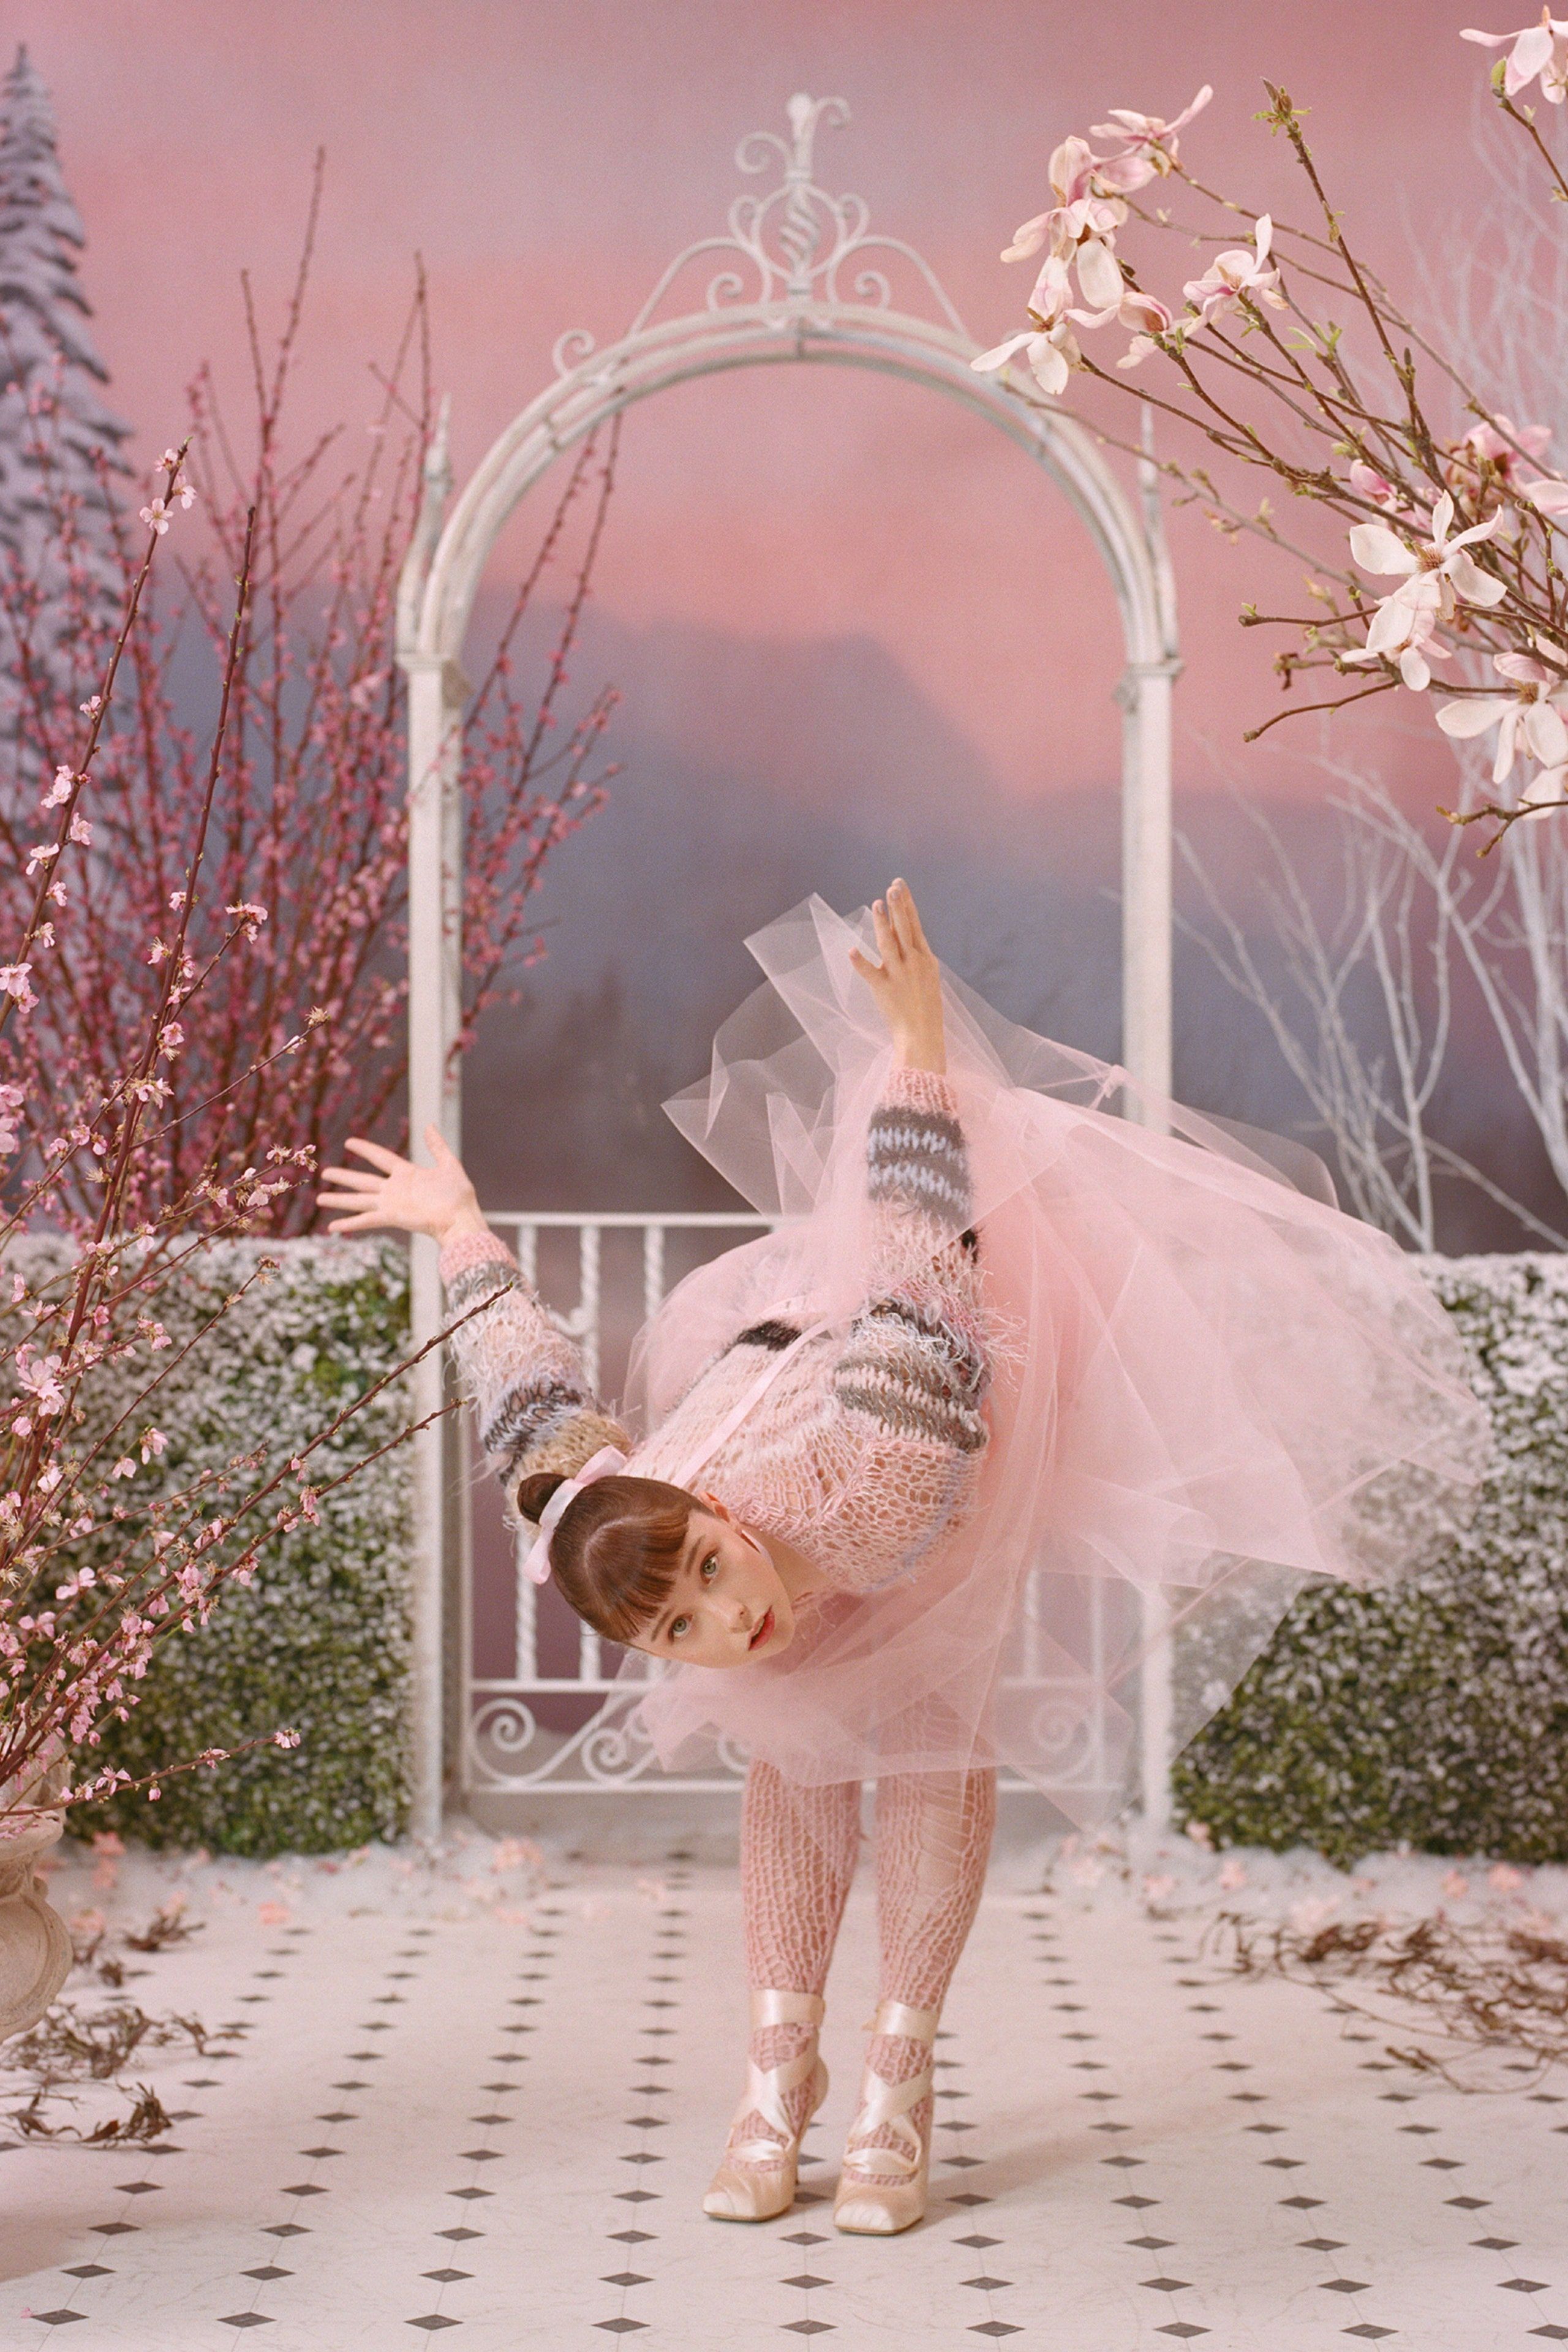 A woman in a pink dress and pink shoes dances in a pink room. - Ballet